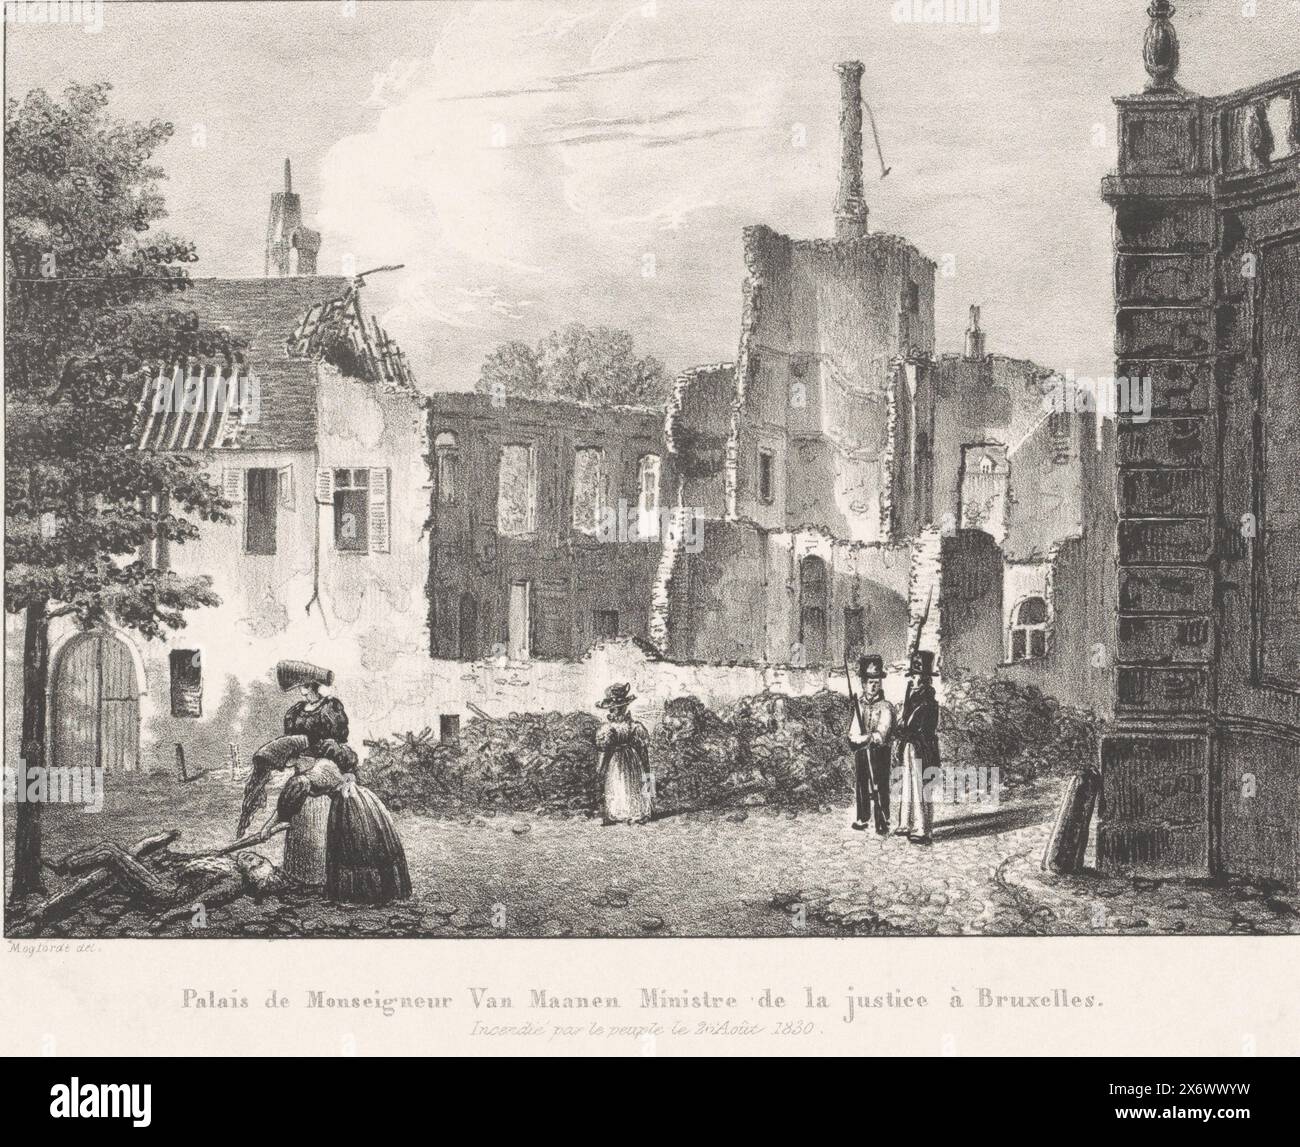 Ruin of Minister Van Maanen's house in Brussels, 1830, Palais de Monseigneur Van Maanen Ministre de la justice à Bruxelles. Incendié par le peuple le 26 Août 1830 (title on object), Prints added to the series Evénemens de Bruxelles, Anvers (...) (1831) (series title), Ruin of the burned-out house of Cornelis Felix van Maanen, minister of Justice, in Brussels. Set on fire by the people on August 26, 1830. Part of a group of prints from several other series related to the plates in the recueil about the events during the Belgian Revolution in Brussels, Antwerp and other cities in the period Augu Stock Photo